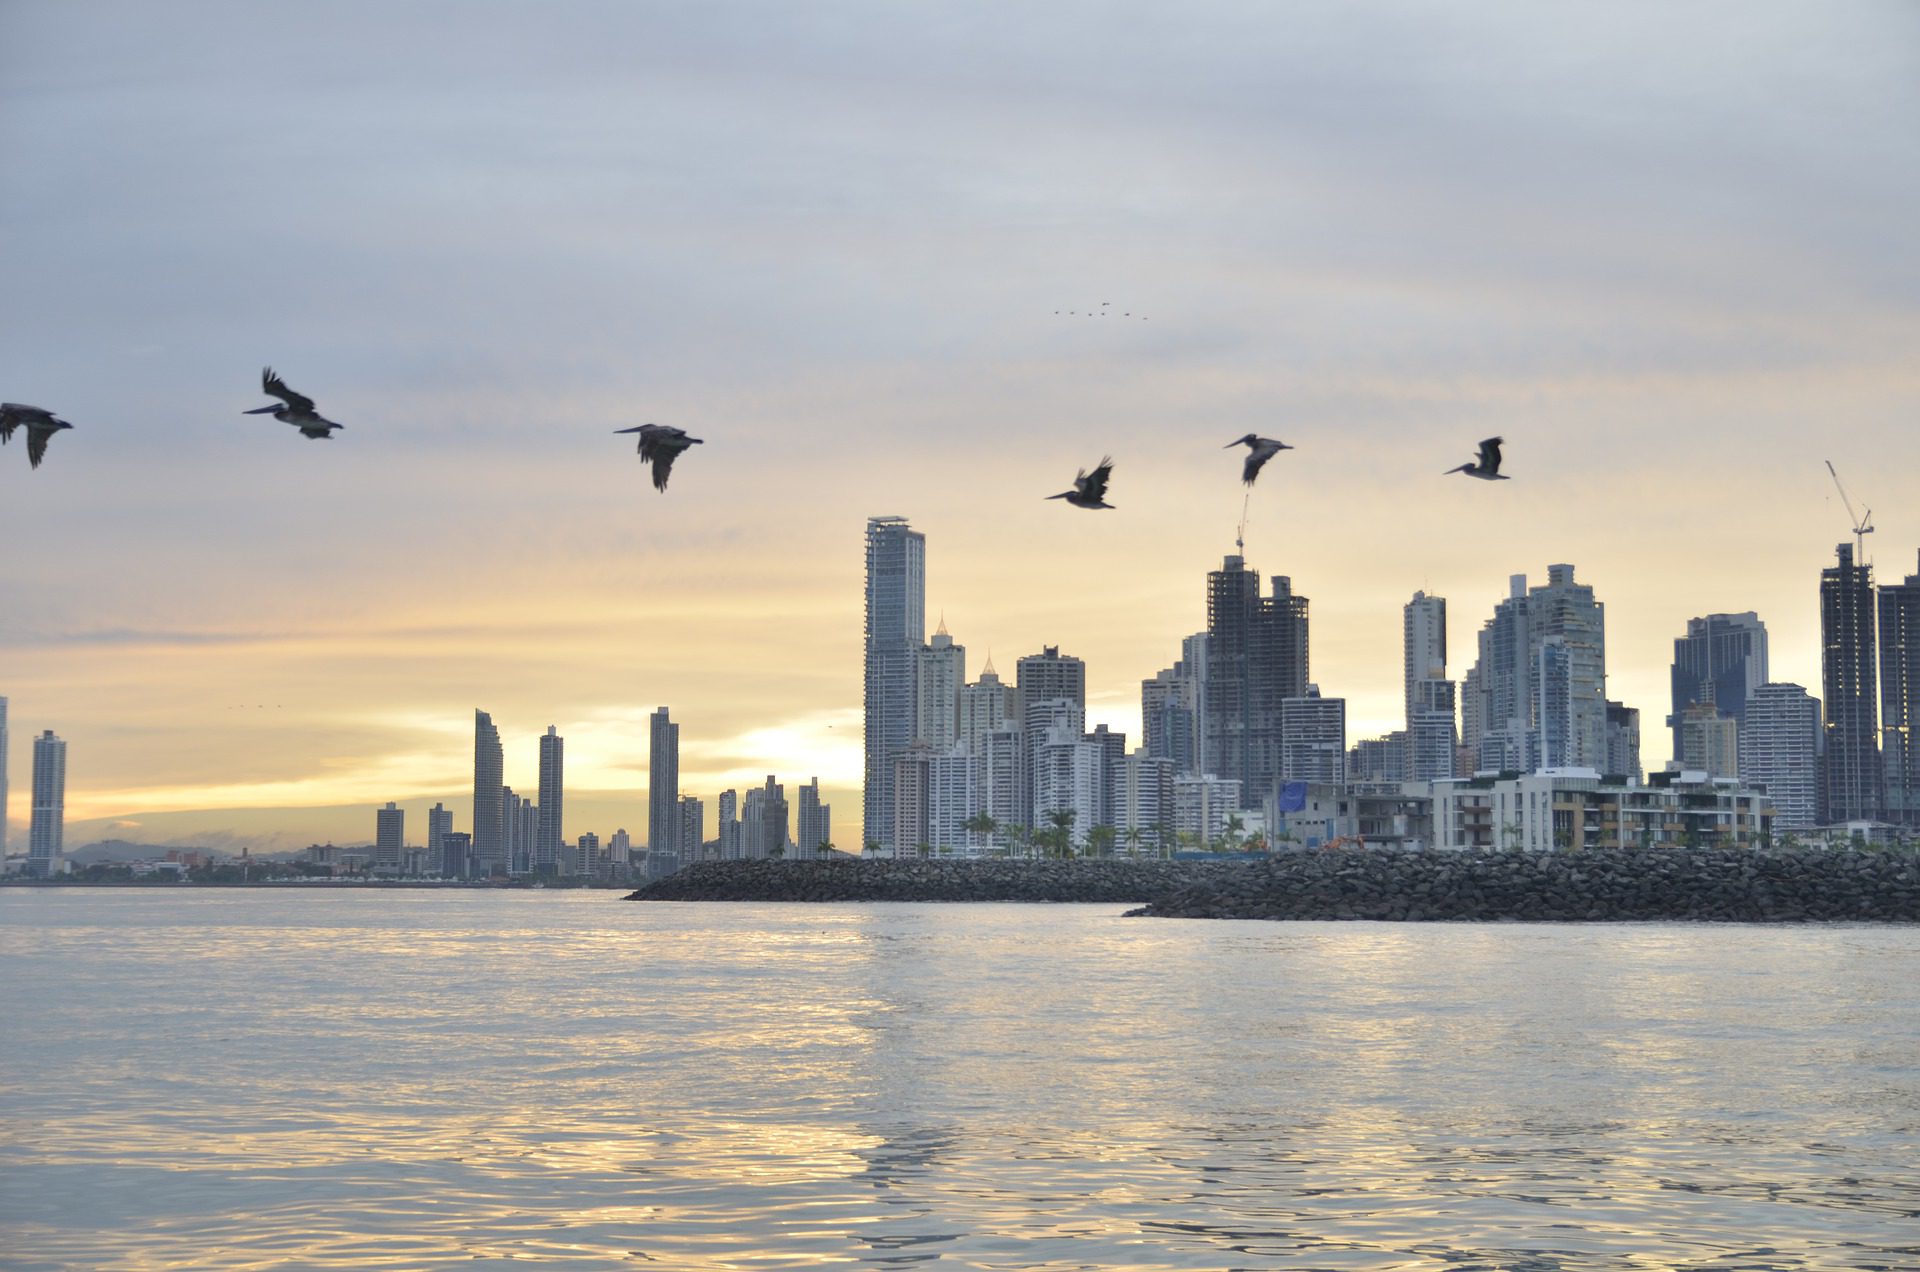 Panama City, where you will likely complete the application process to receive a Qualified Investor Visa in Panama